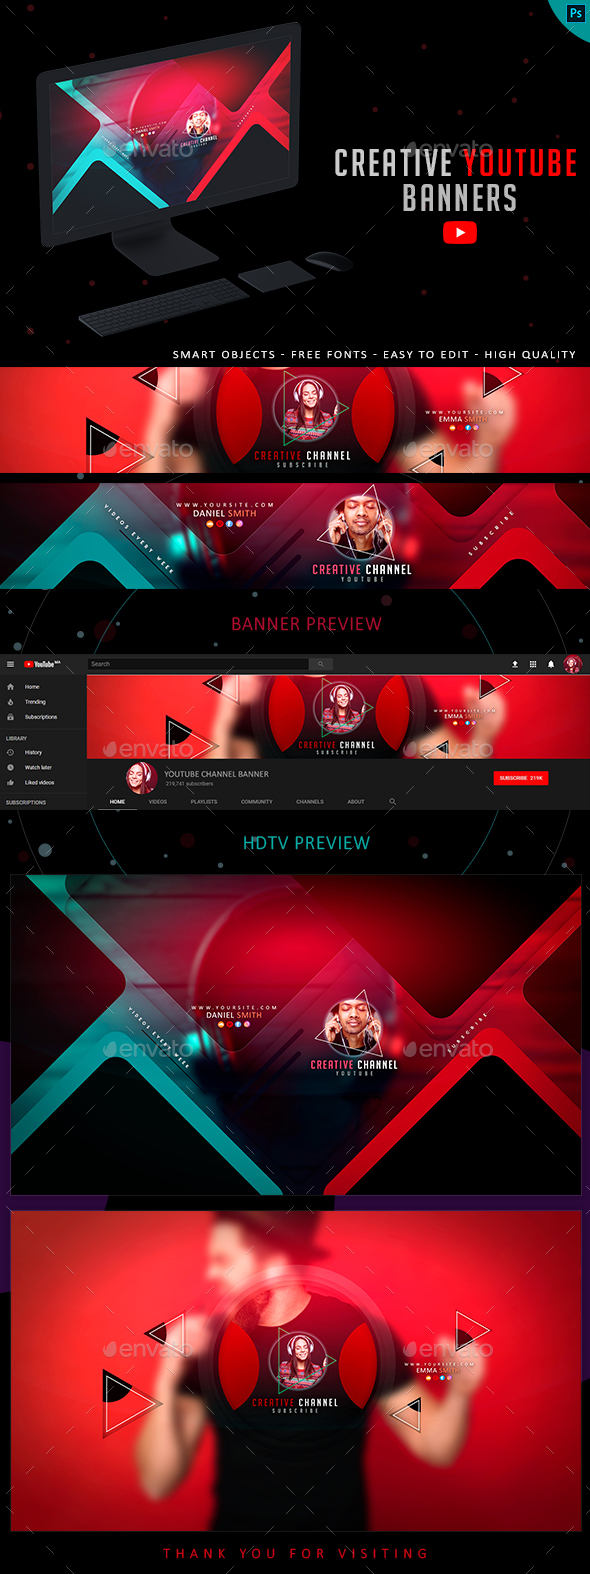 Youtube Banners Graphics Designs Templates From Graphicriver